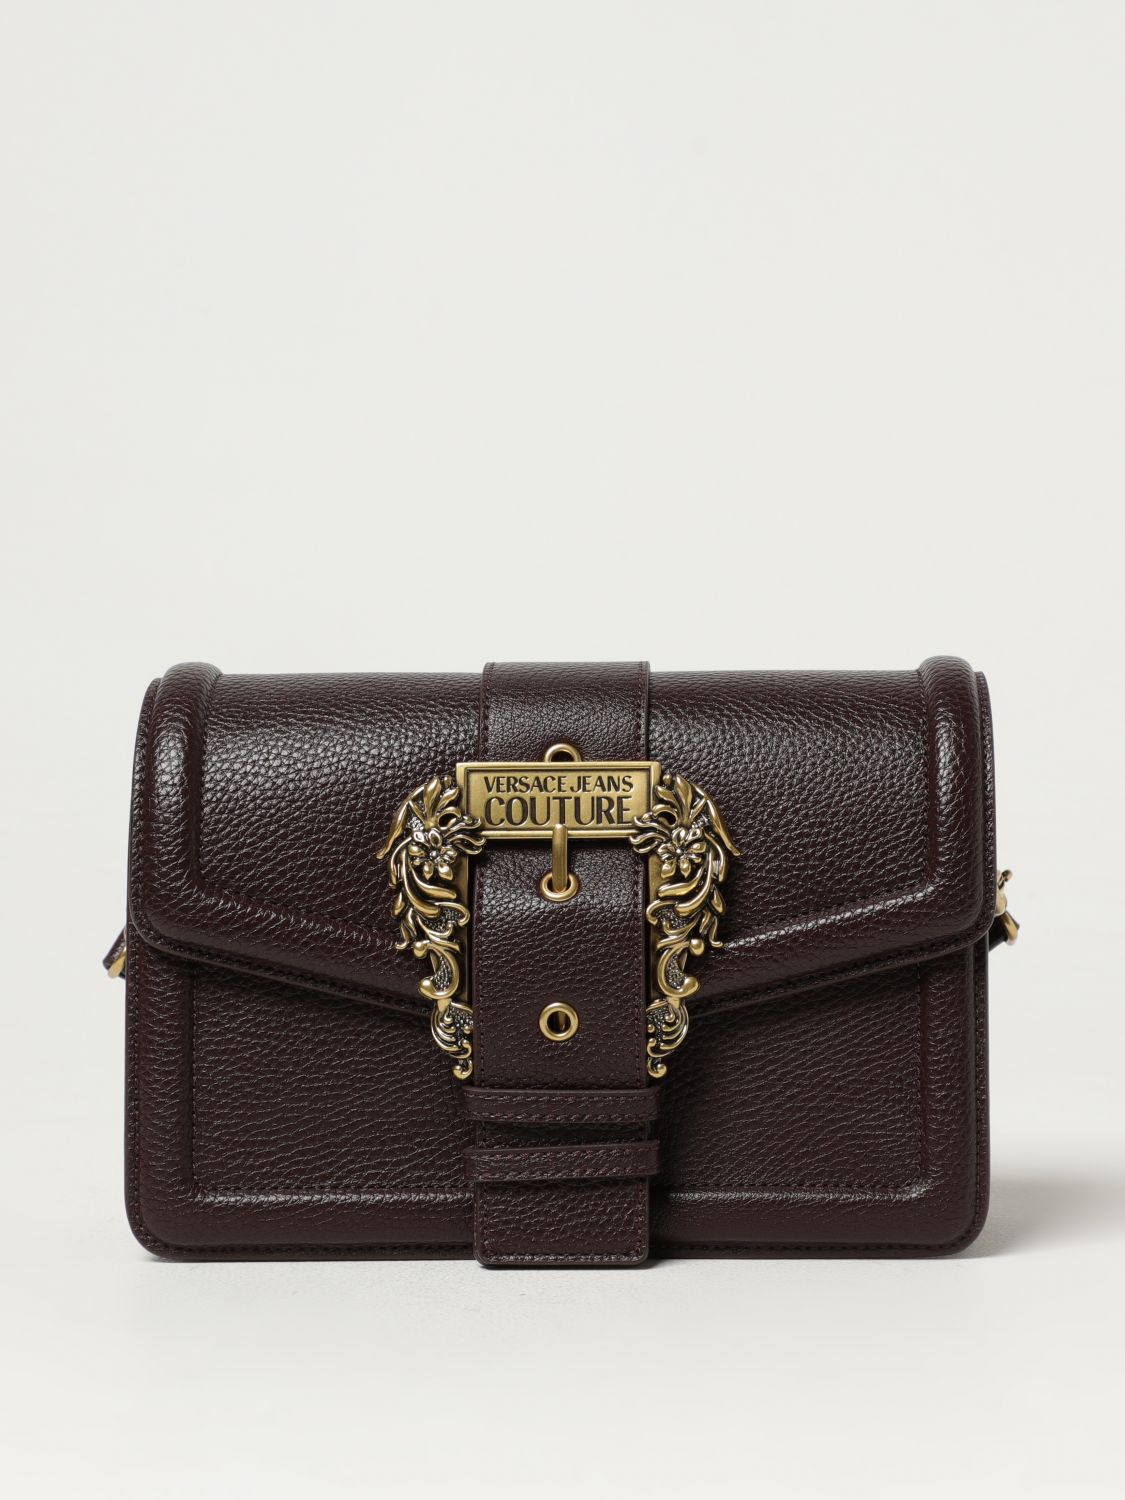 Versace Jeans Couture Bag In Grained Synthetic Leather In Brown